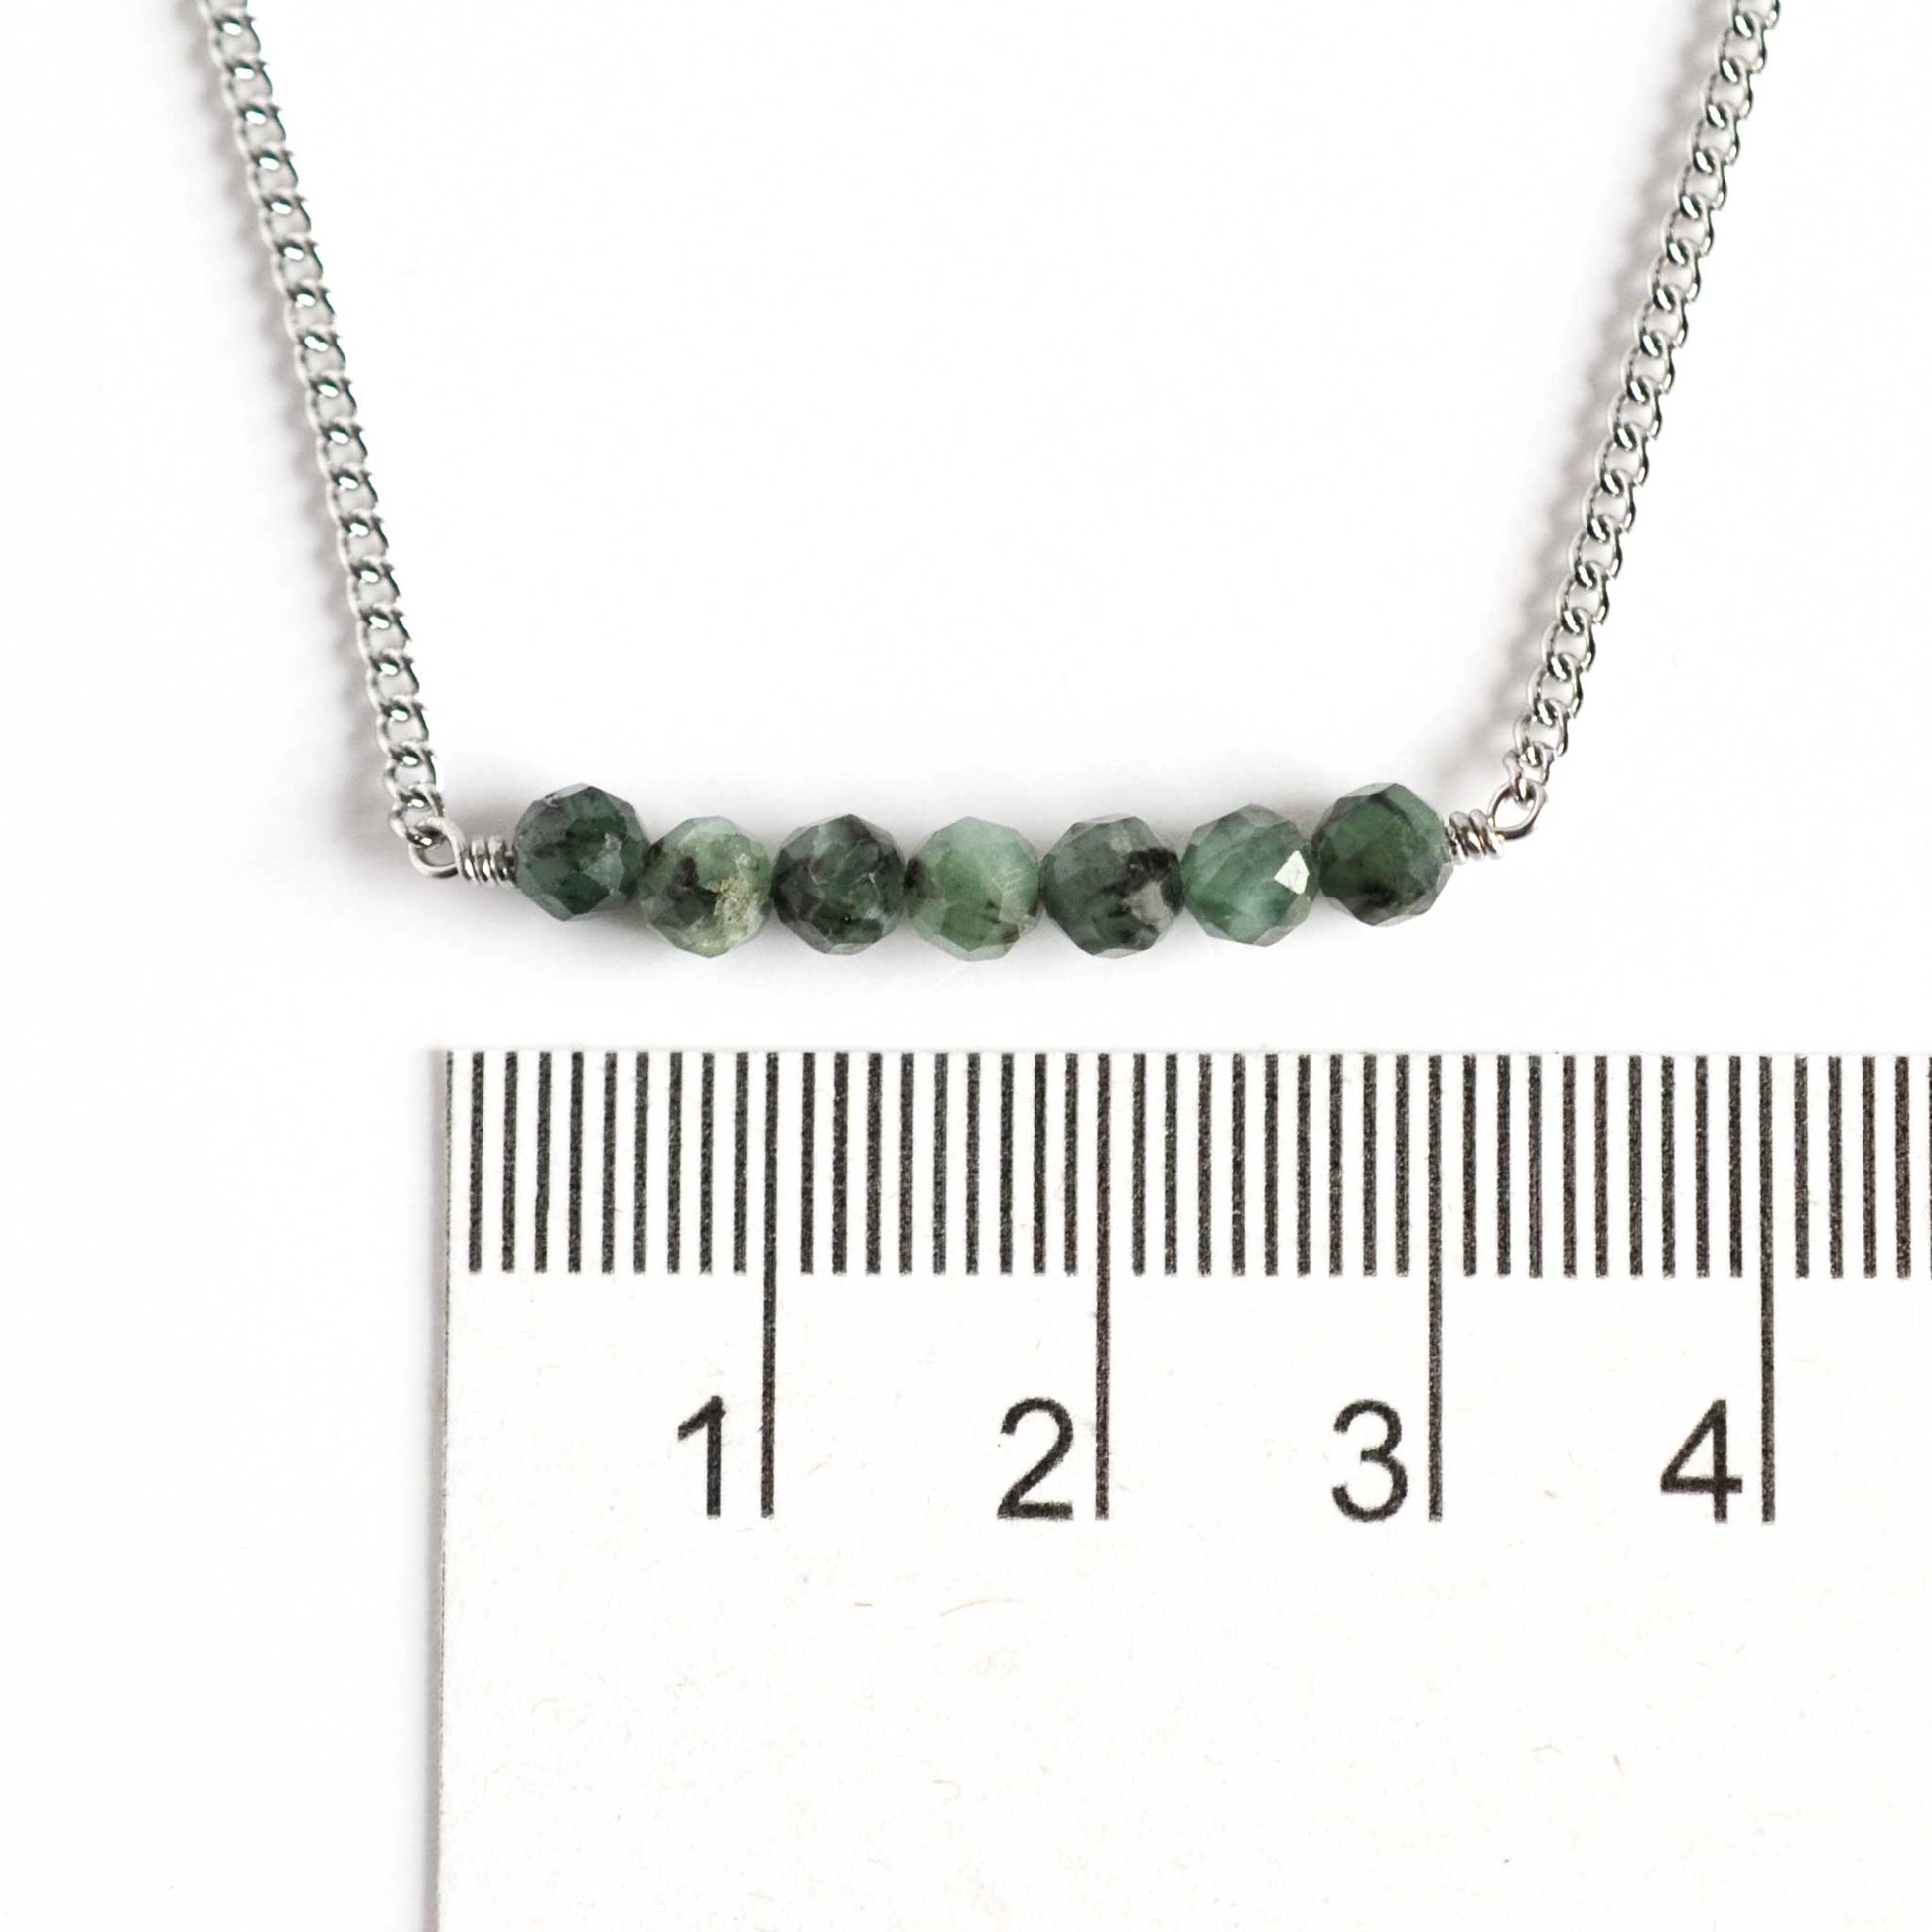 Dainty Emerald necklace with 4mm gemstones next to ruler